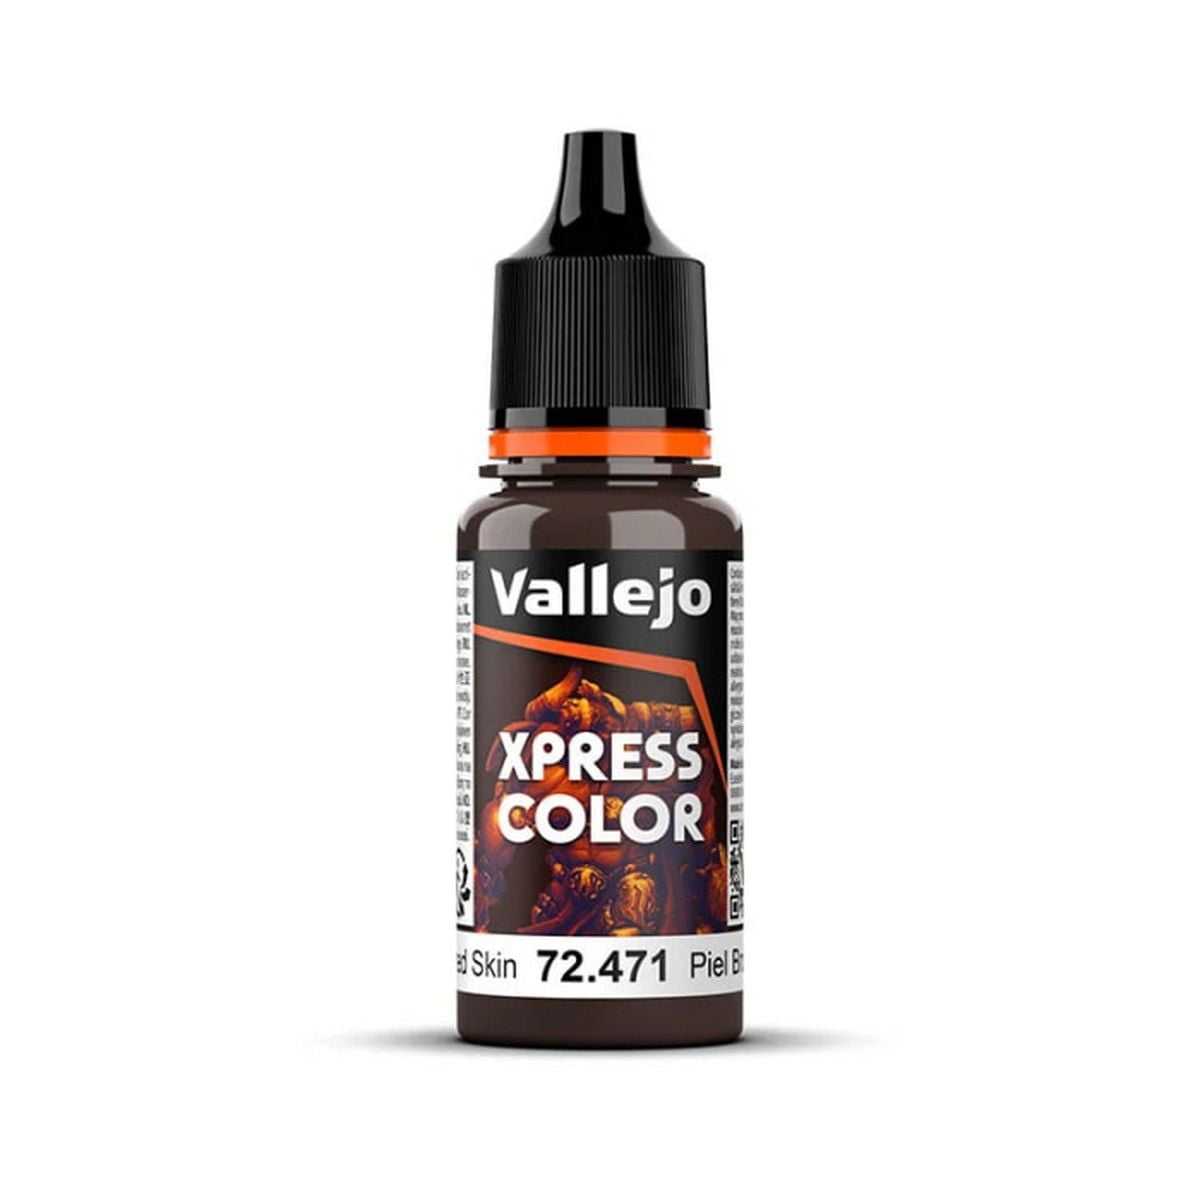 Xpress Color - Tanned Skin - 18ml